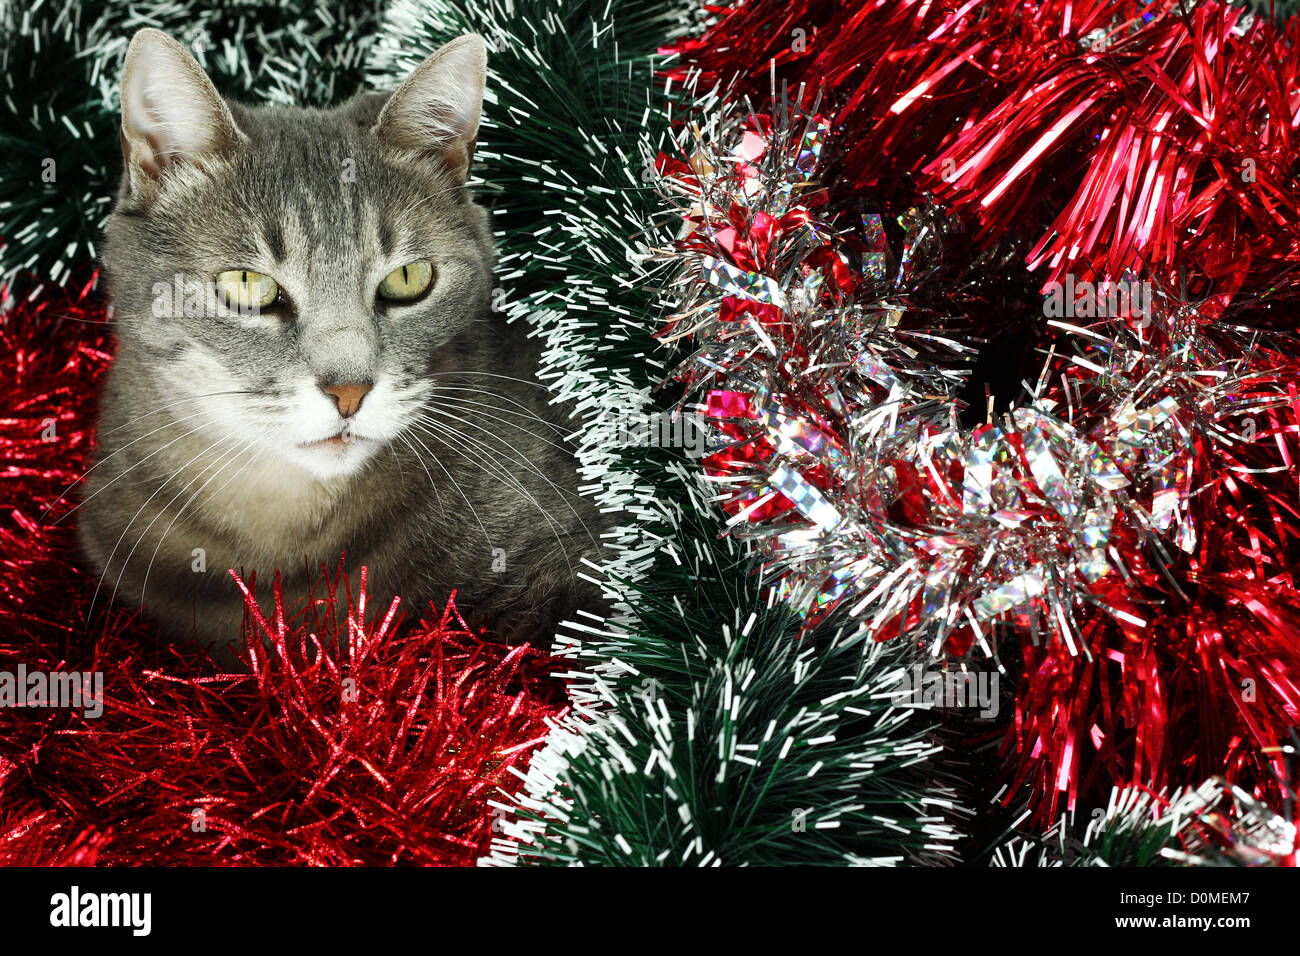 Kitty covered by various Christmas decorations Stock Photo